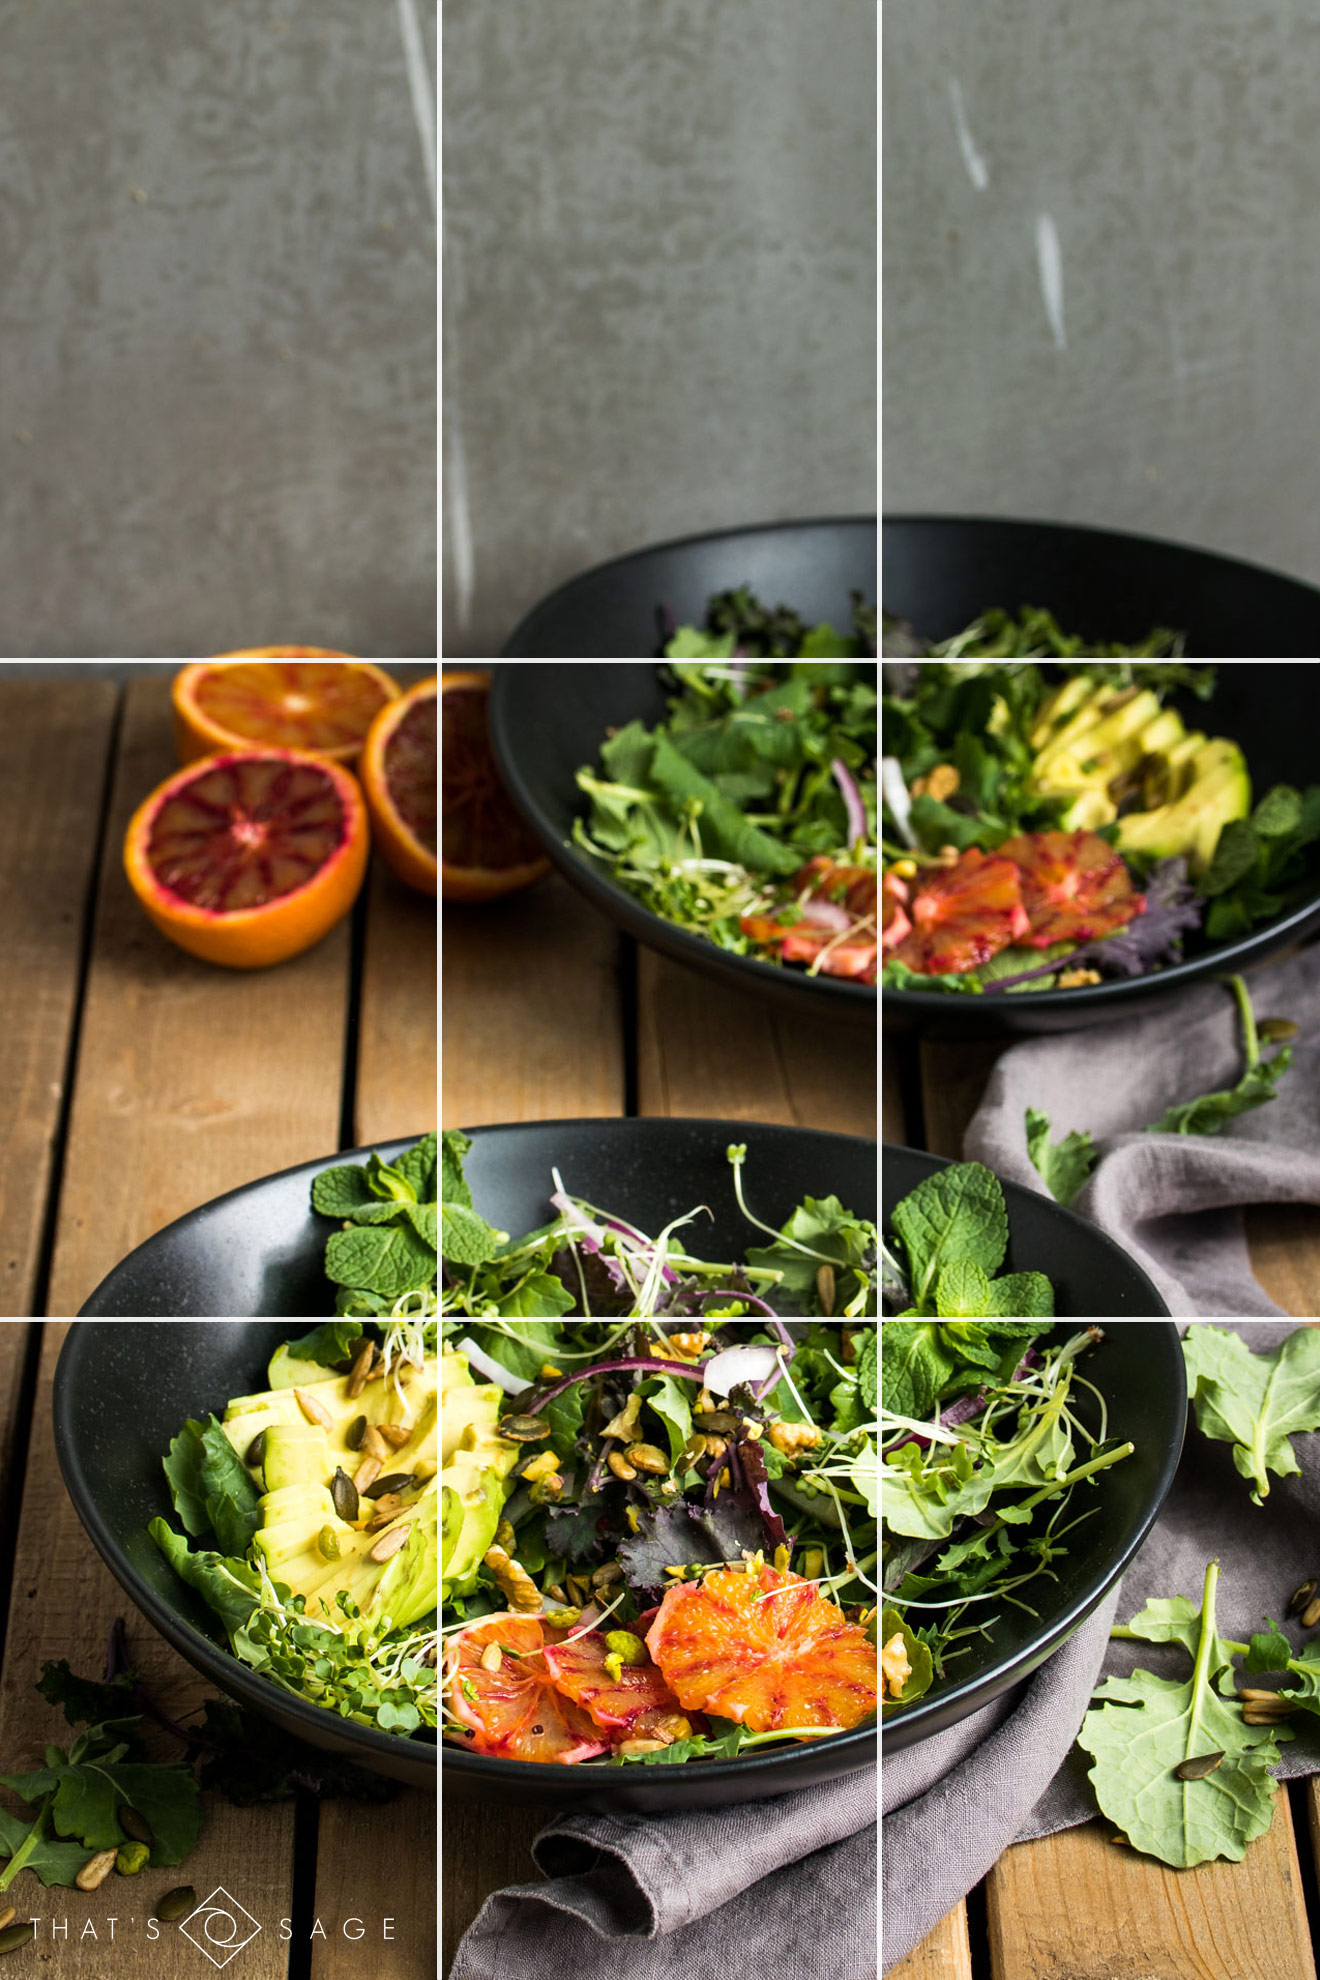 How to nail your food photography composition using the rule of thirds - plus a free photo planning kit!